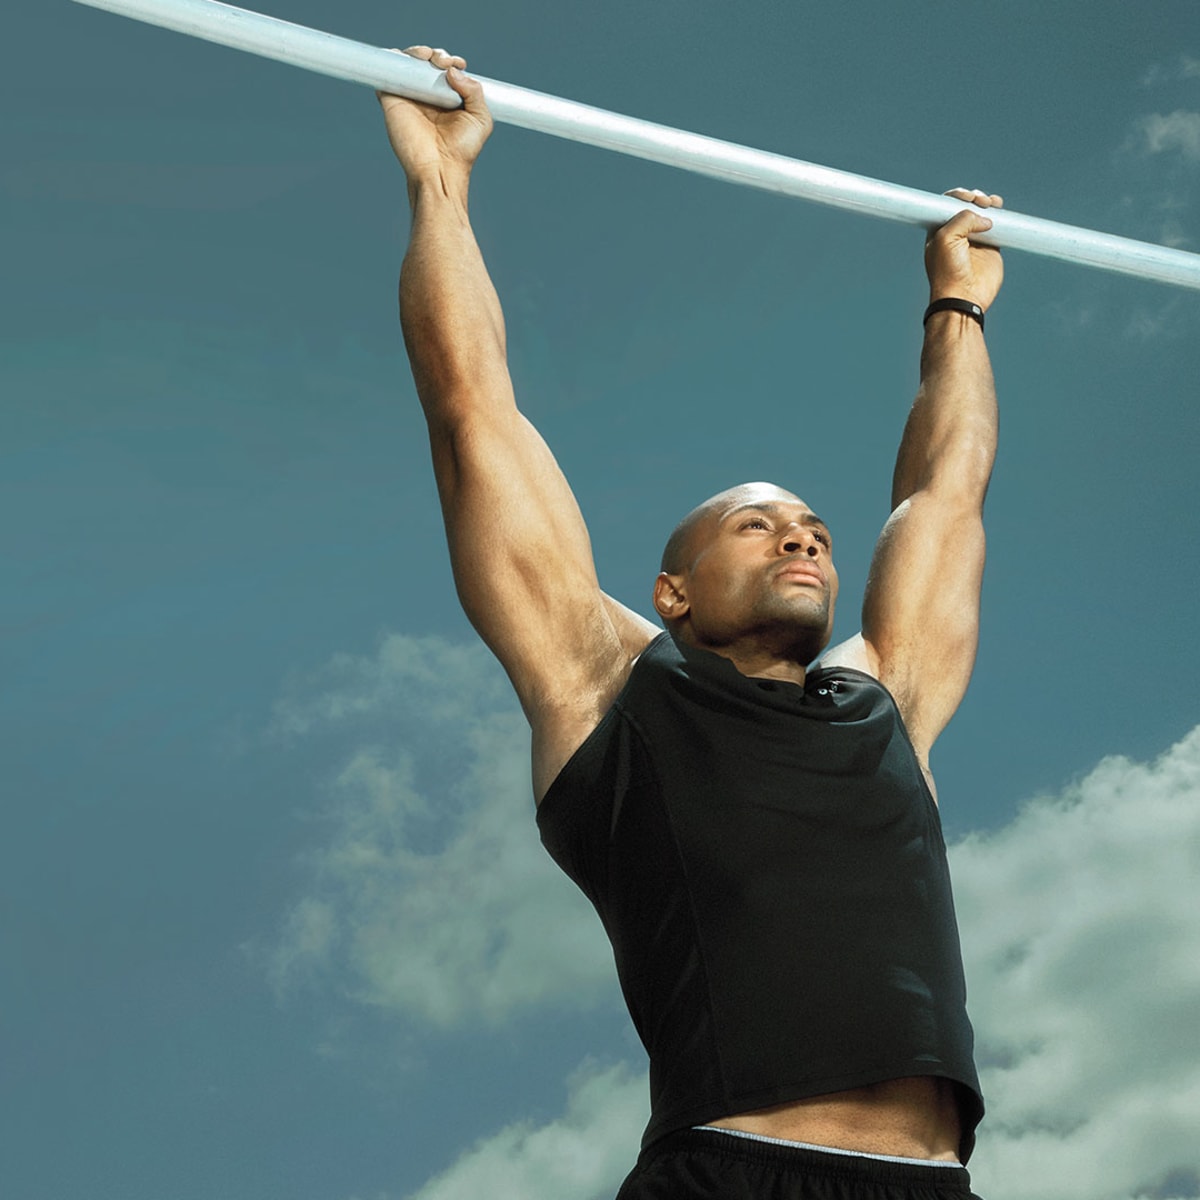 How to Do a Pullup: Tips on Proper Form for Men - Men's Journal